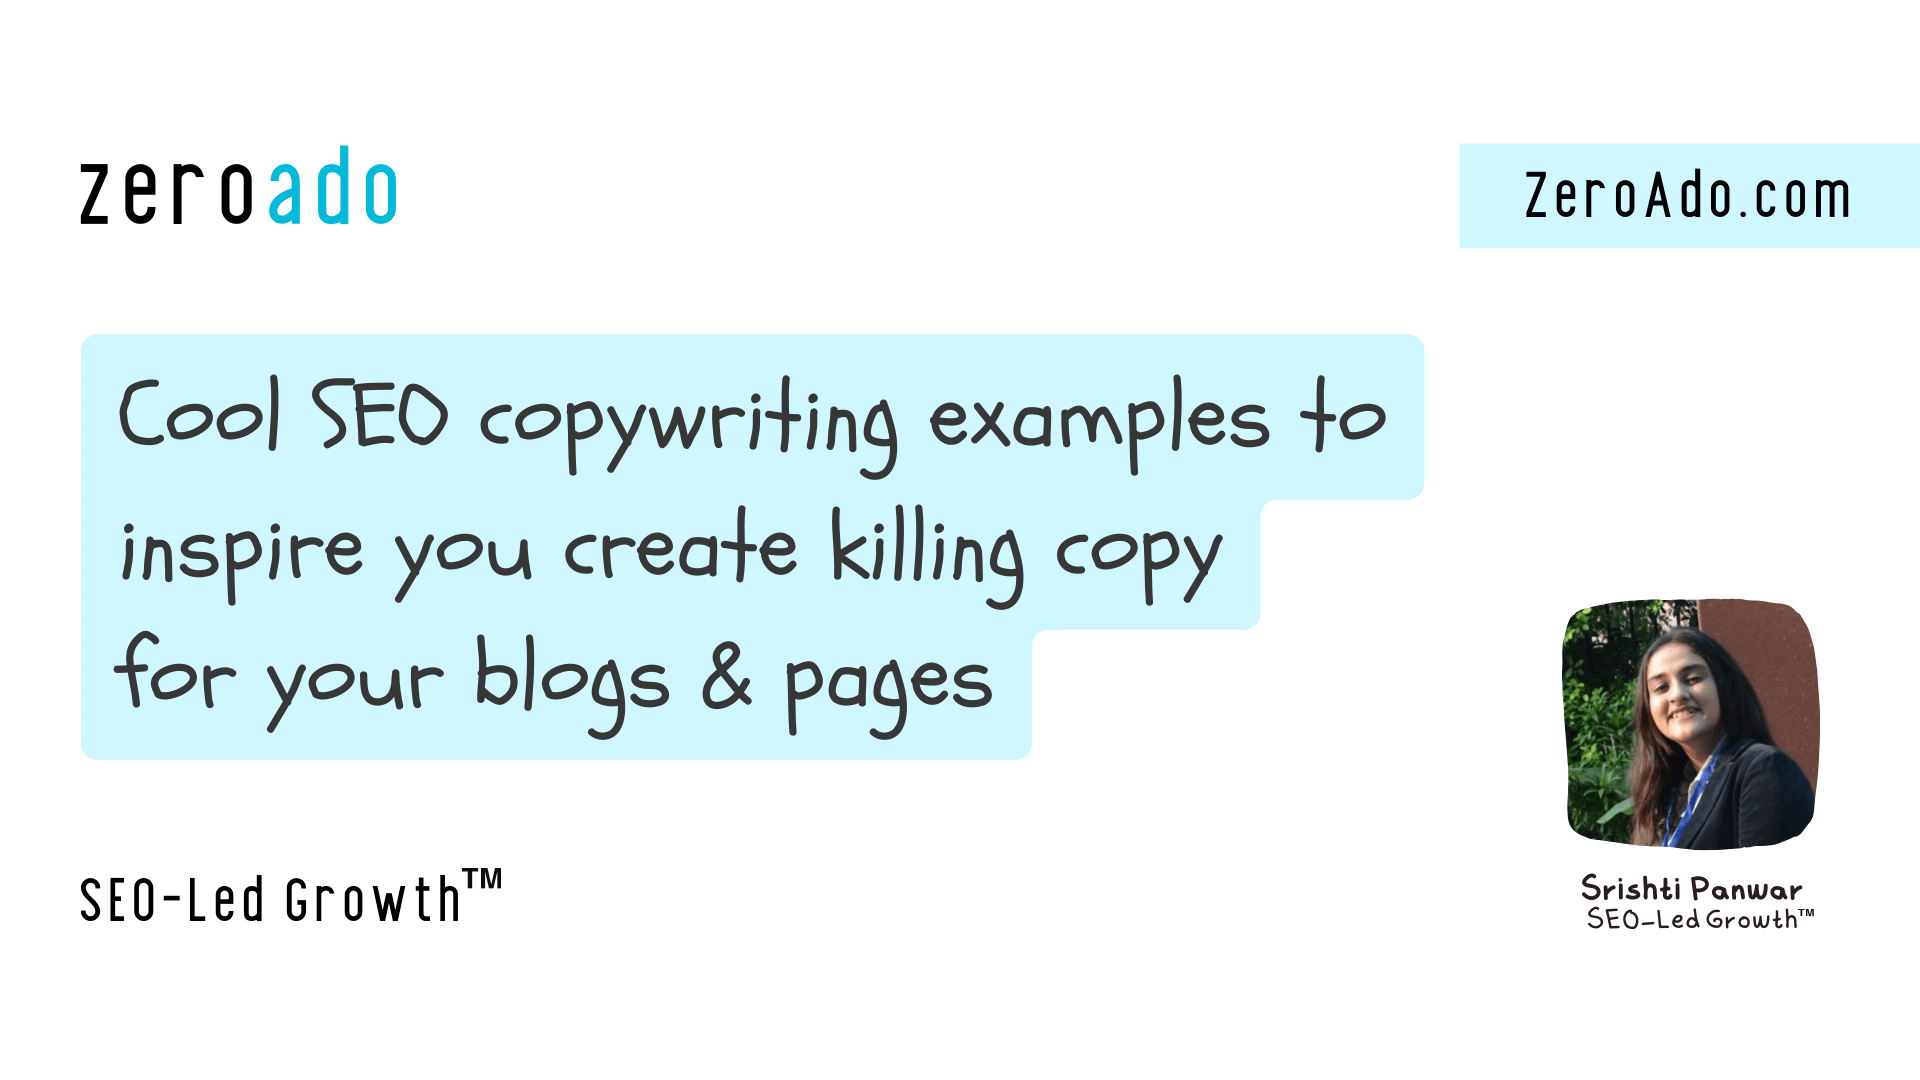 SEO copywriting examples to learn from.